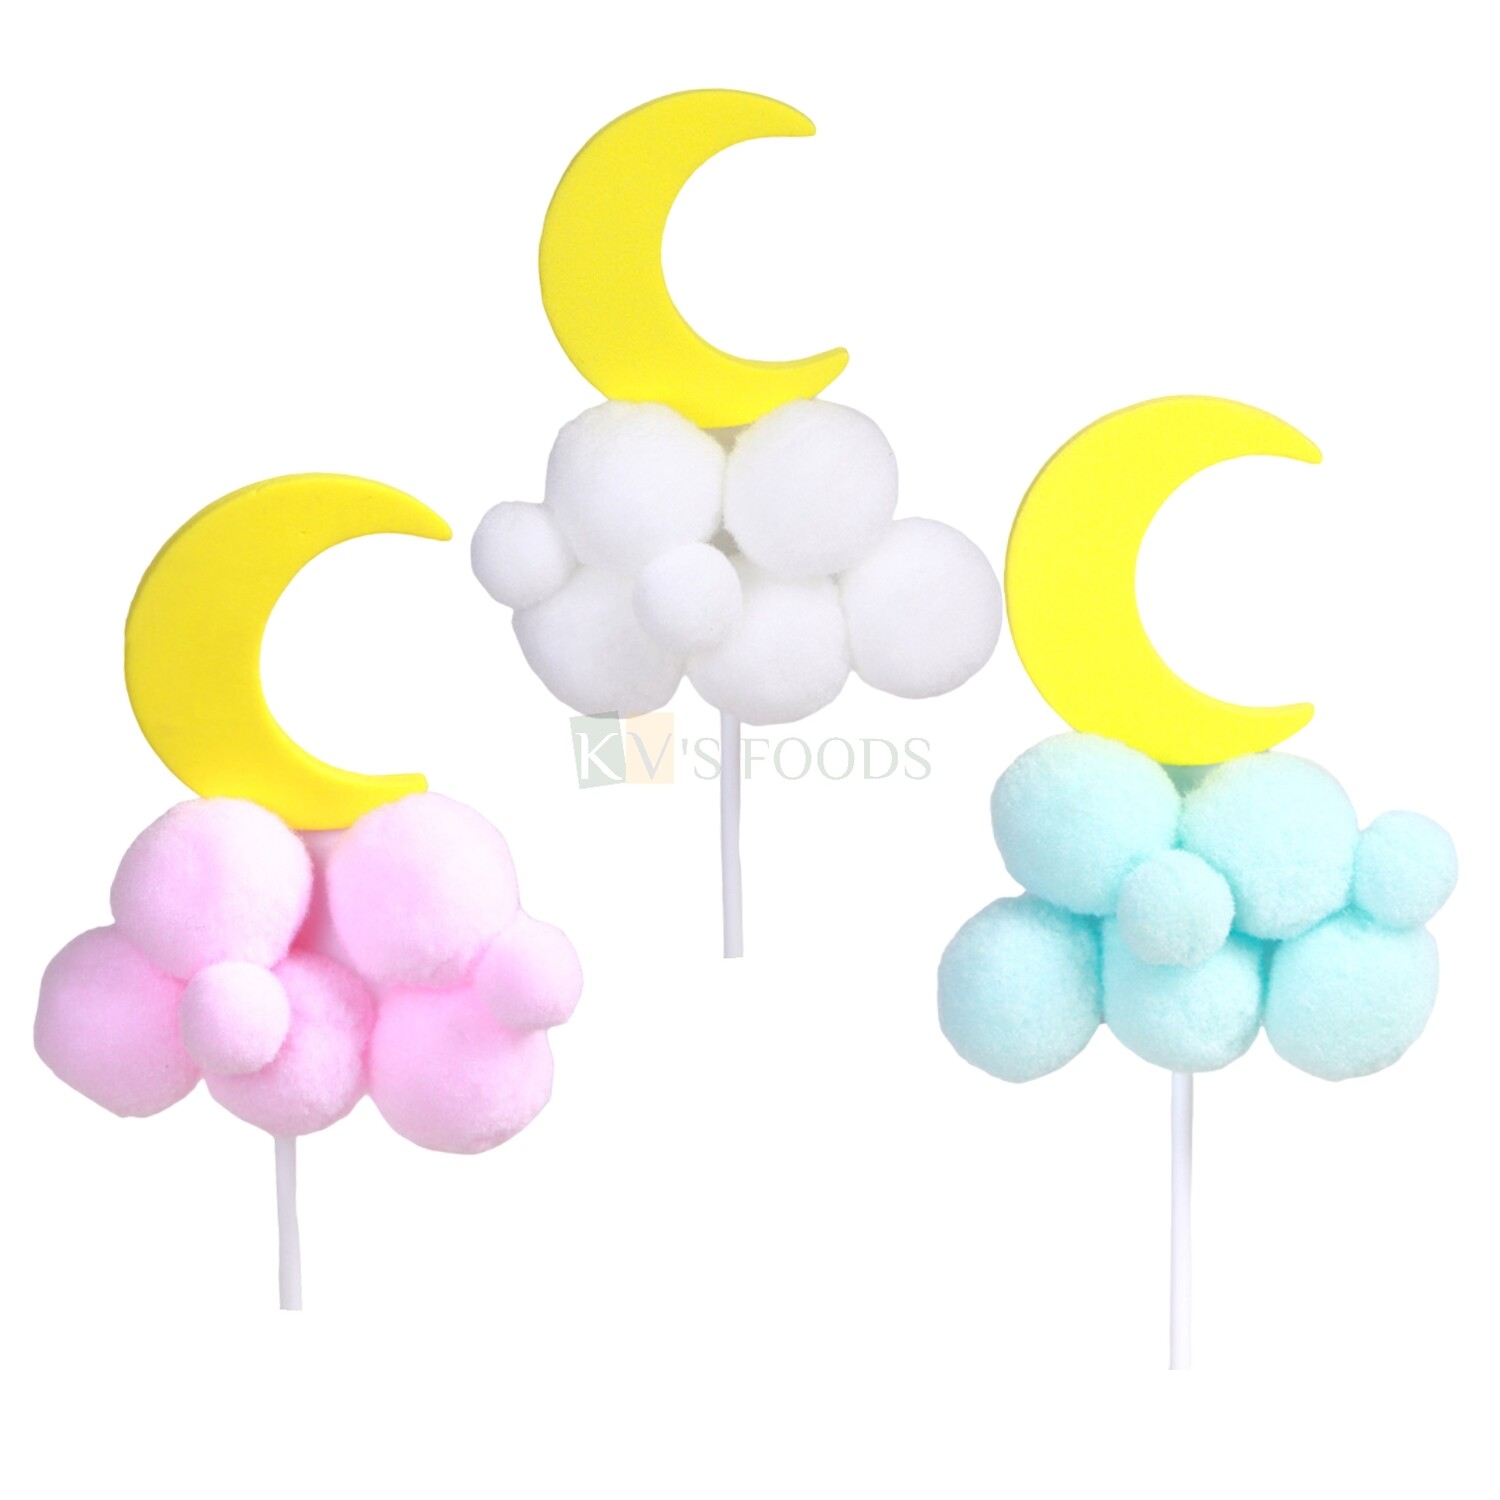 1PC Baby Pink, White, Baby Blue Half Moon and Cloud Cotton Balls POM POM Soft Cake Topper, Insert for Wedding, Baby Shower, Bachelorette Party, Birthday DIY Cake Decoration Party Supplies